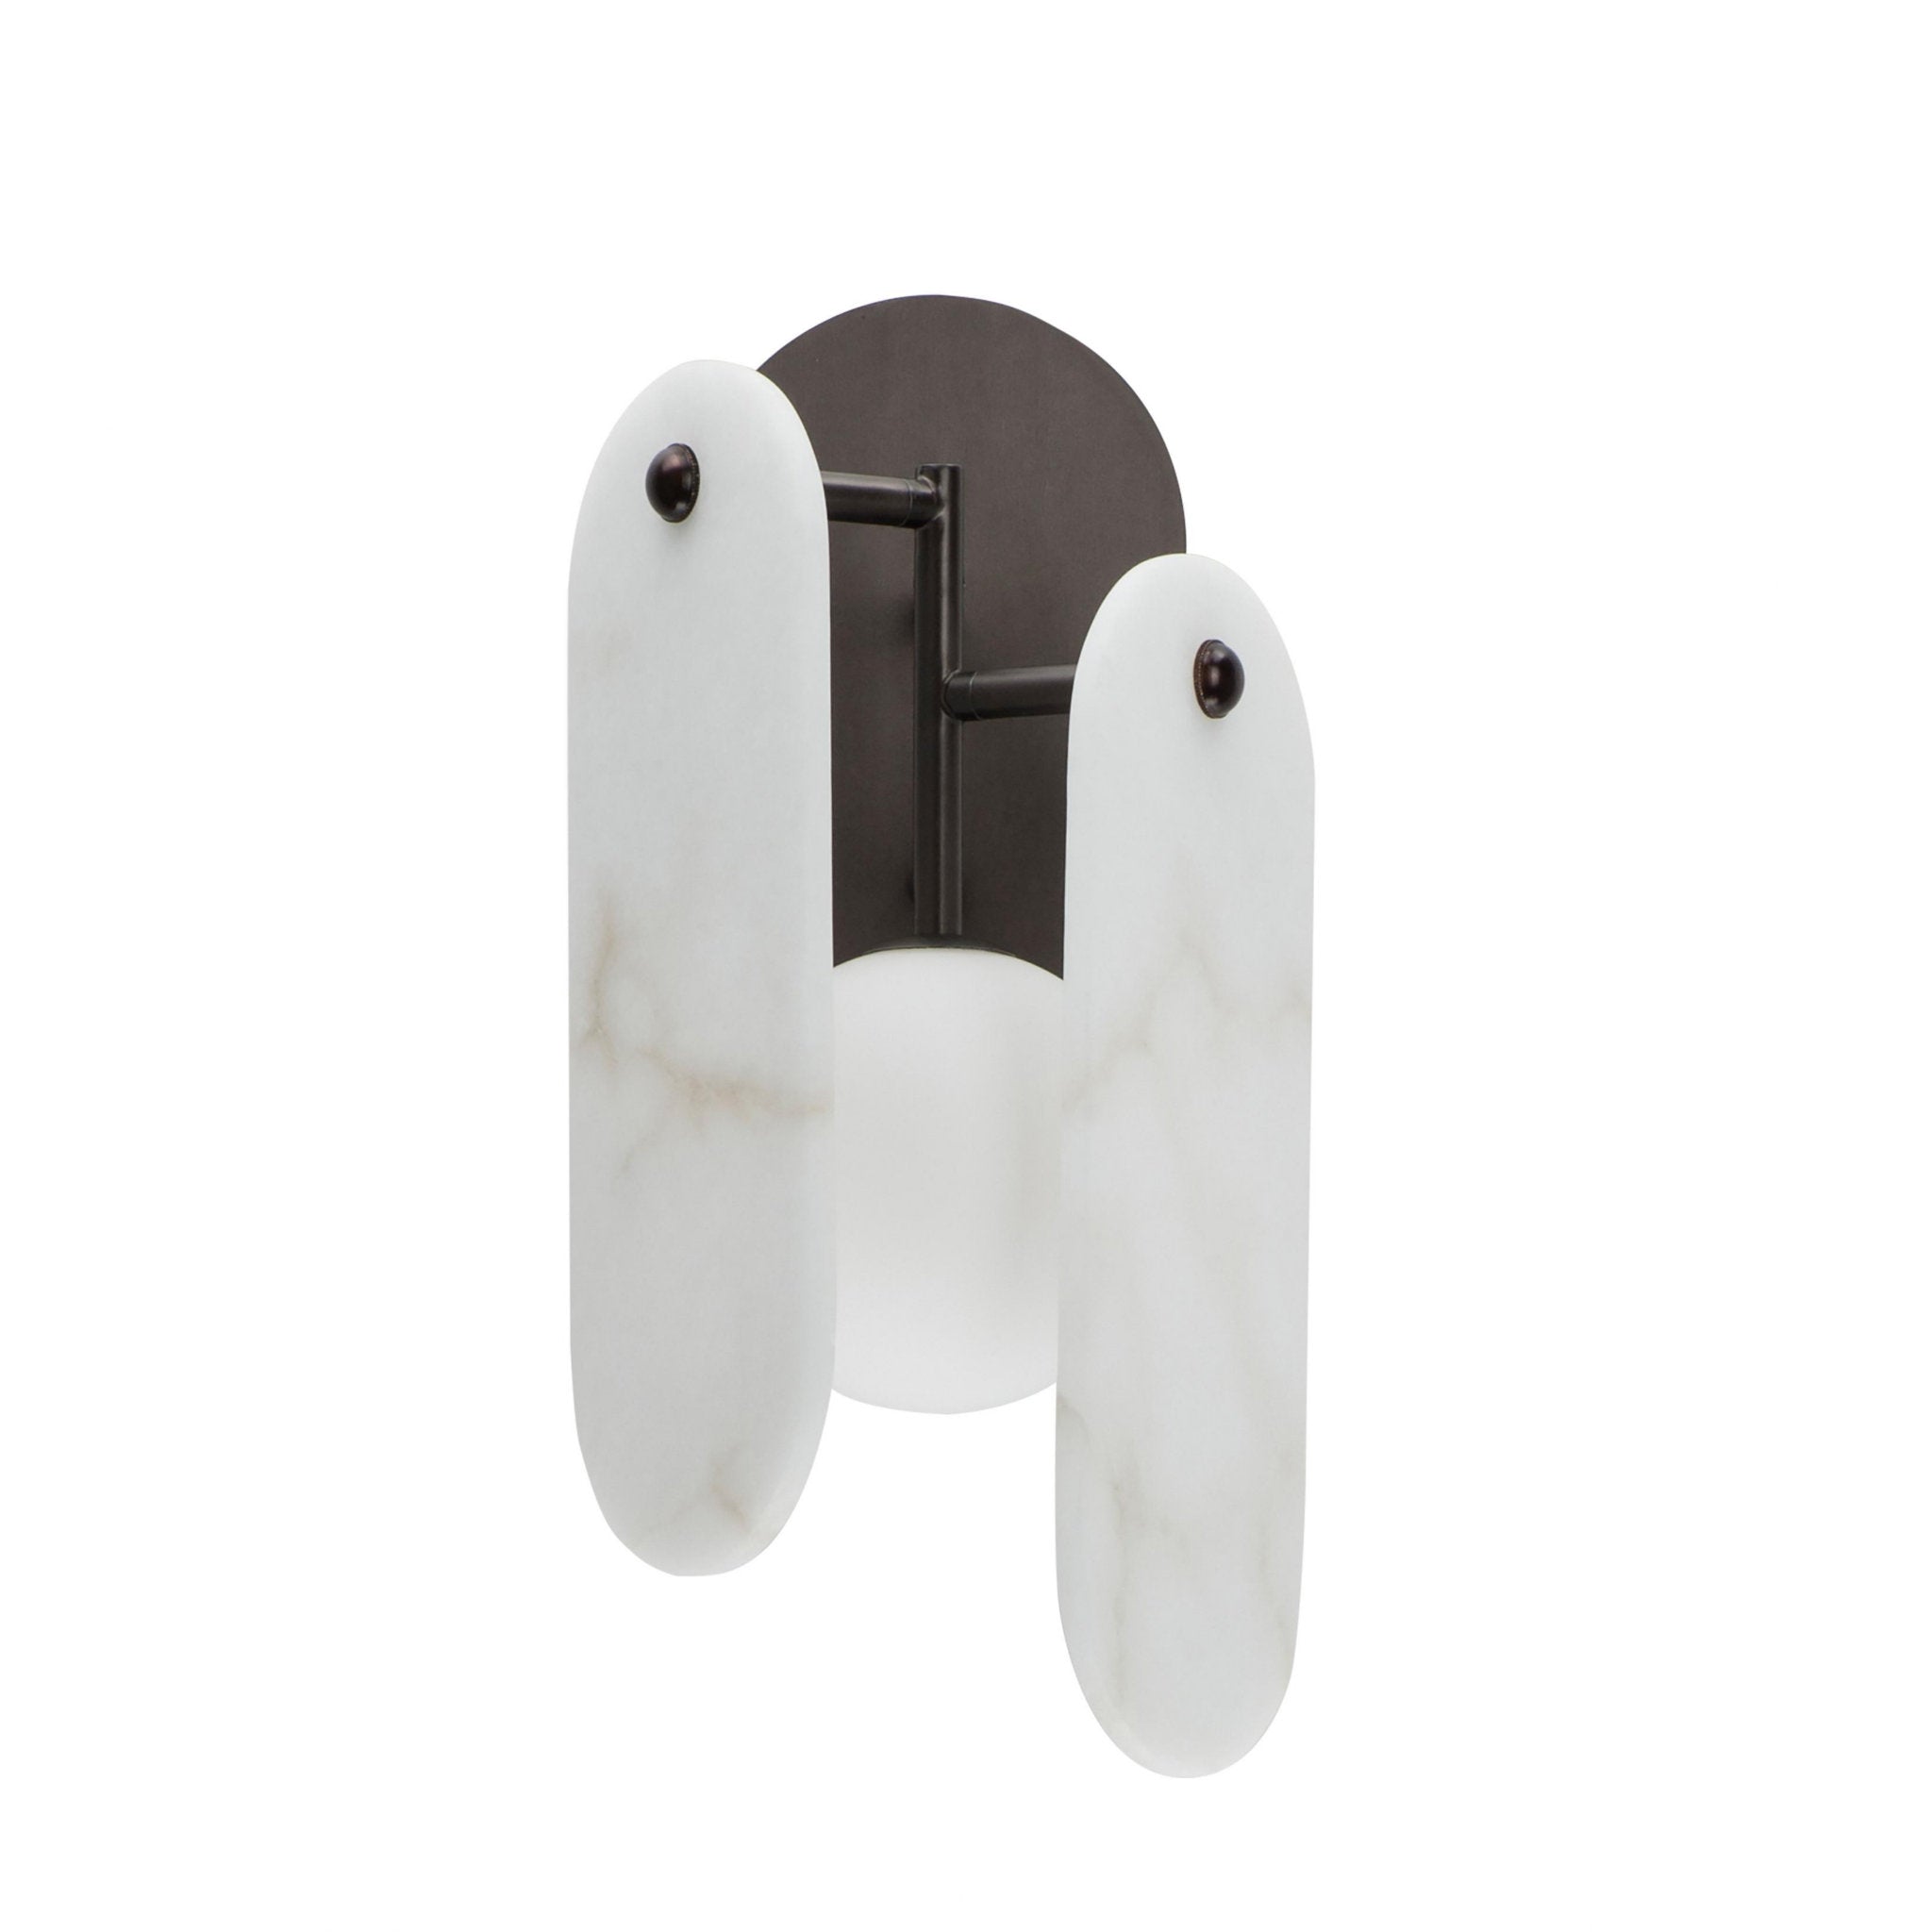 Studio M SM24810WABBZ Megalith Spanish Alabaster Wall Sconce in Brushed Bronze by Nina Magon